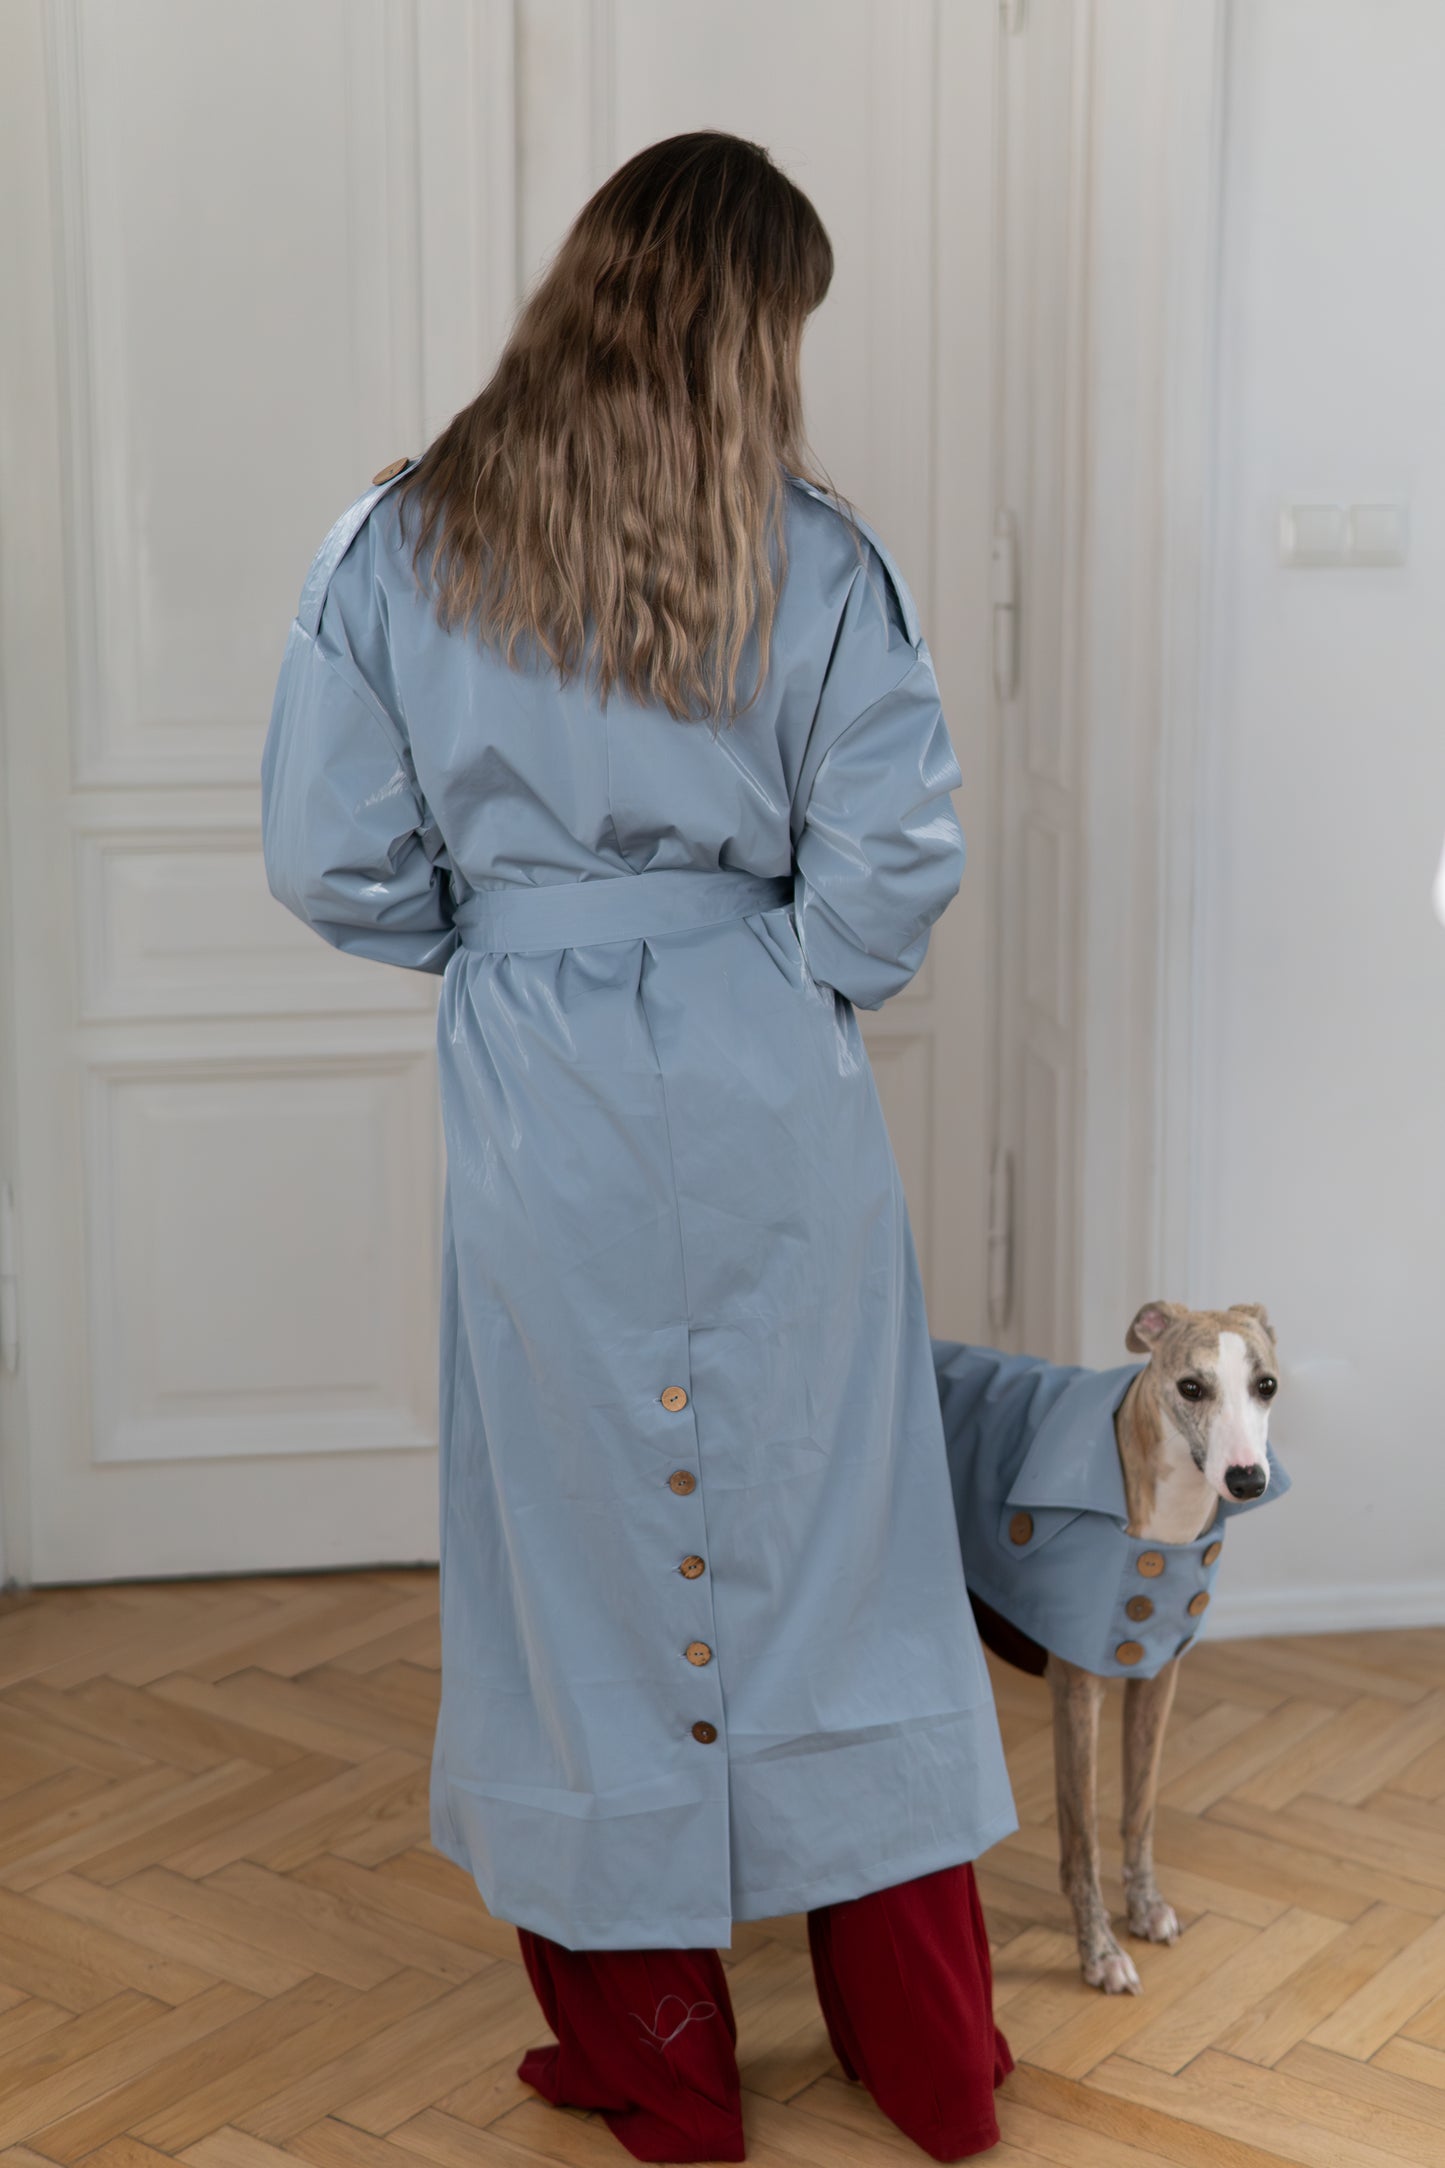 Water-repellent Dog Trench Coat - Chocolate Brown